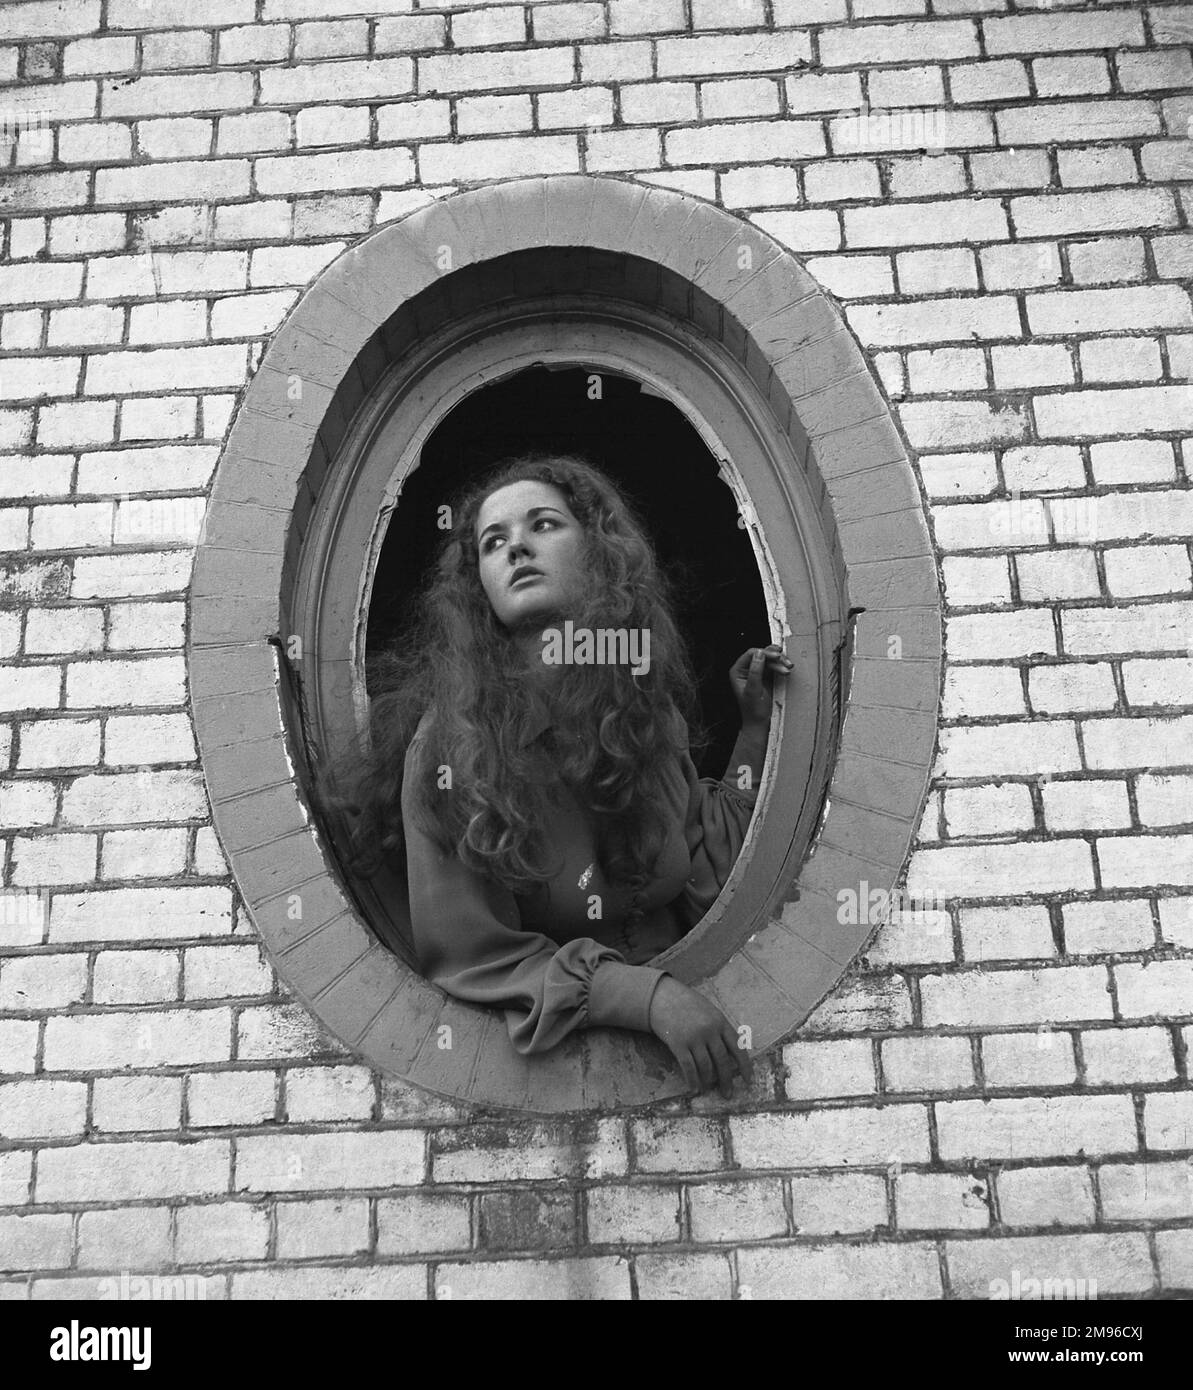 A young woman leans out of an oval window with broken glass, part of a derelict house. Stock Photo